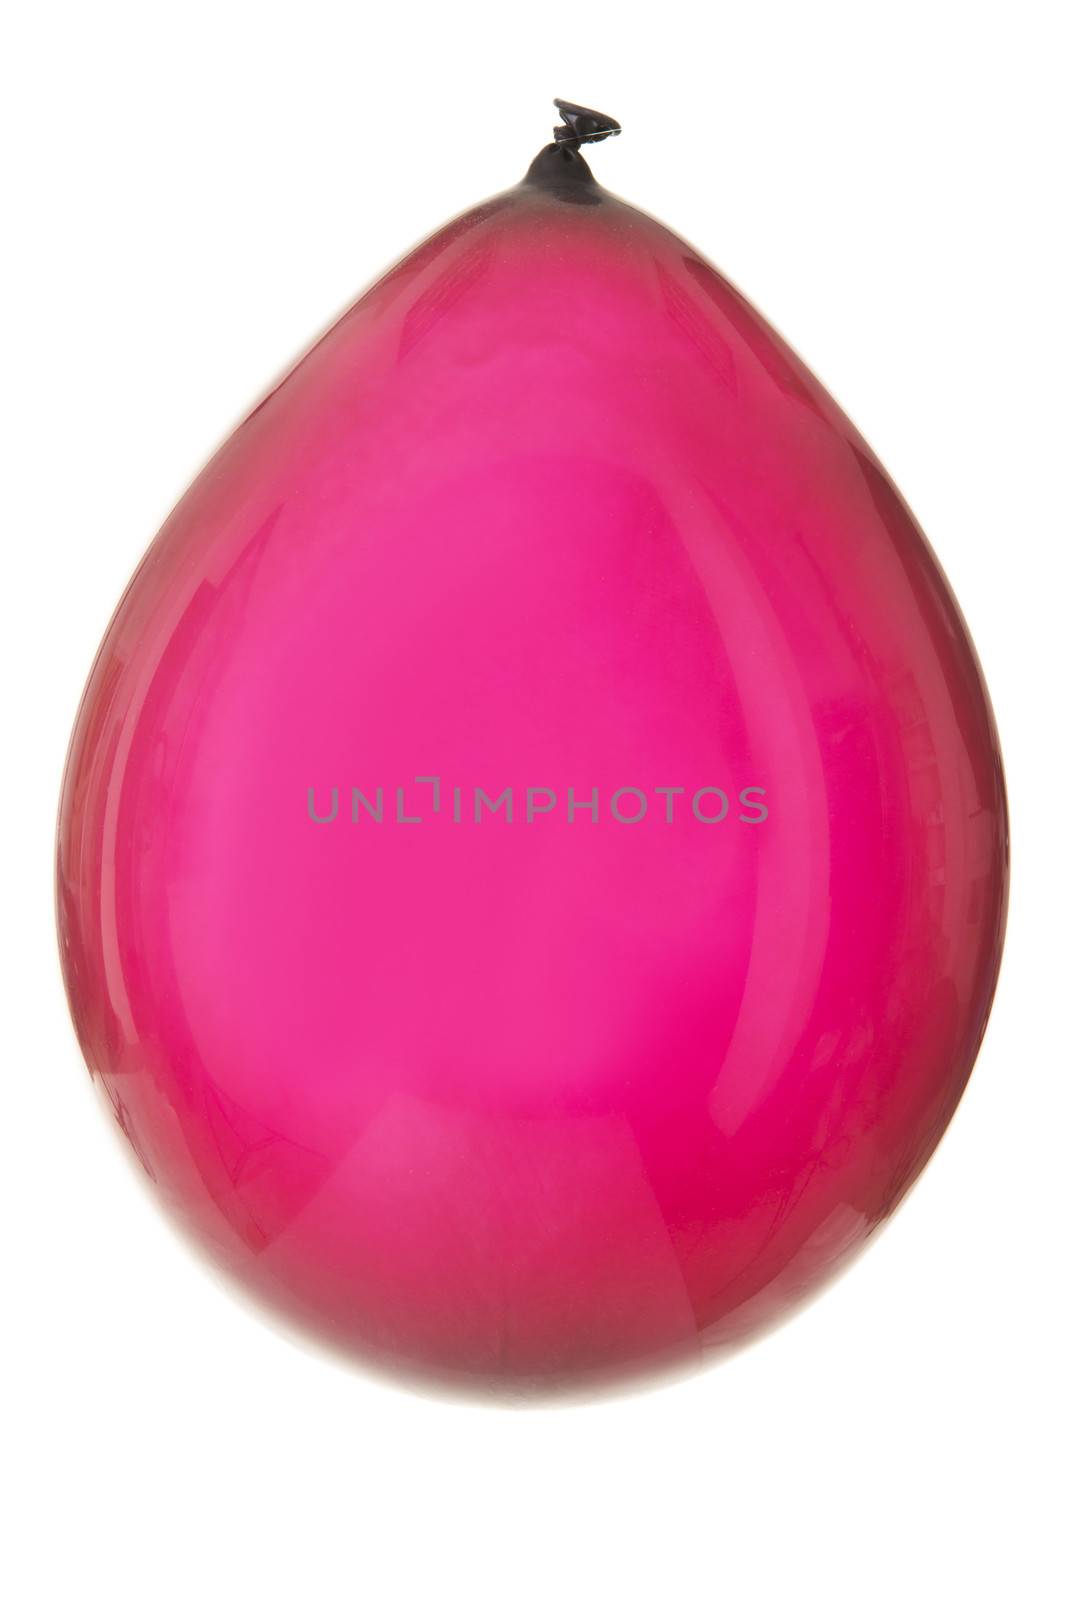 One pink purple balloon. Isolated on white.